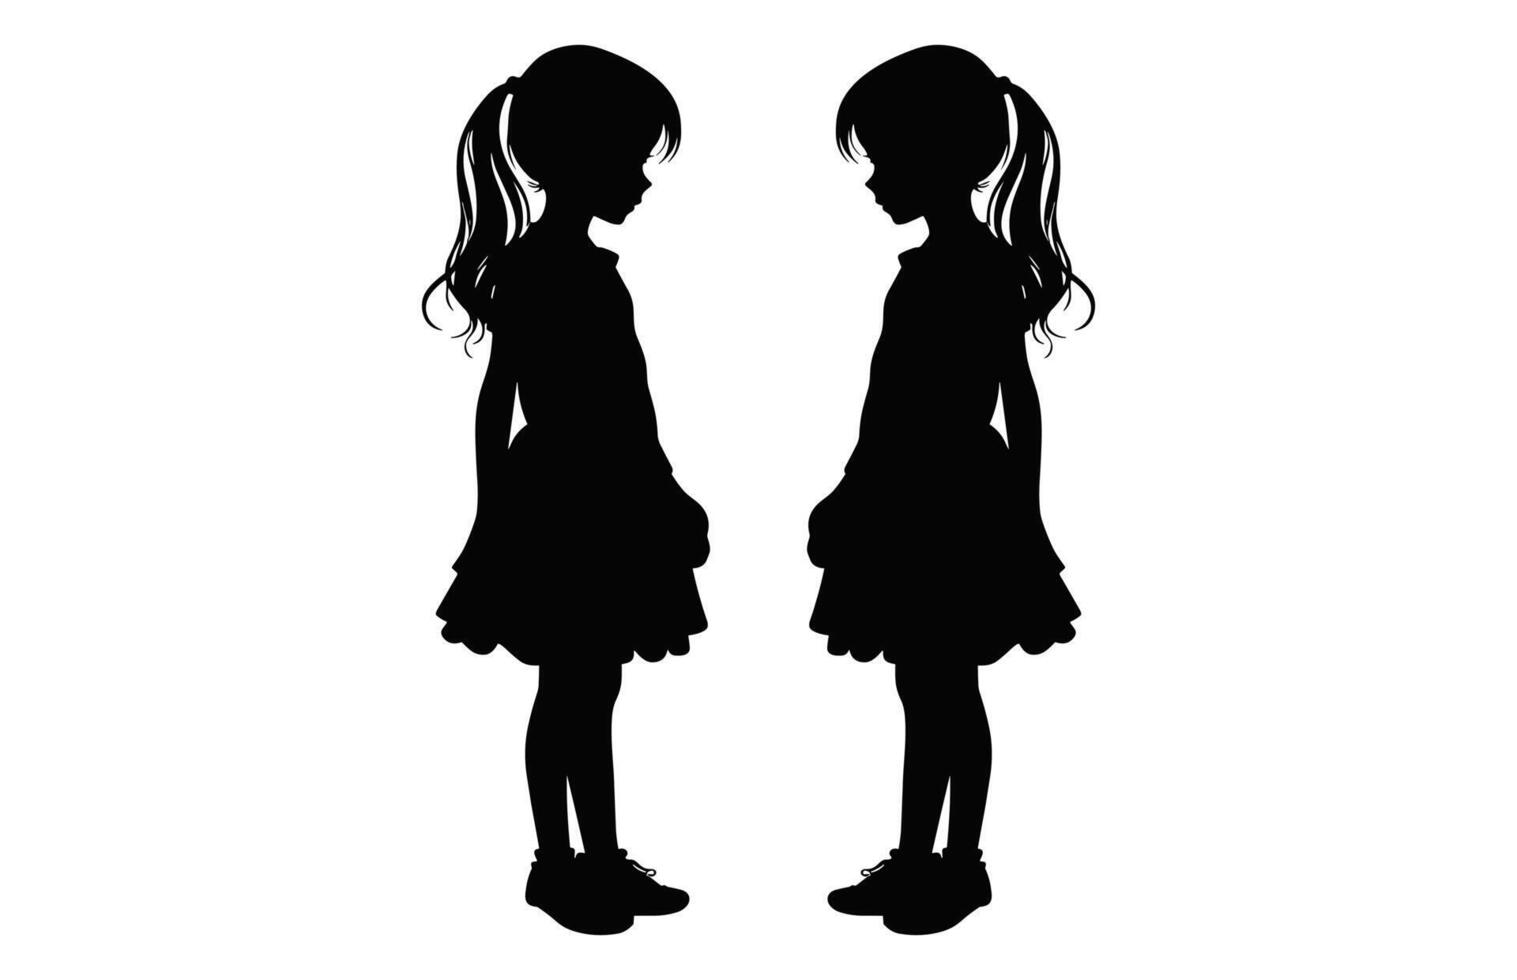 Cute Twin Sister Silhouette black vector, Twins girls silhouette isolated on a white background vector